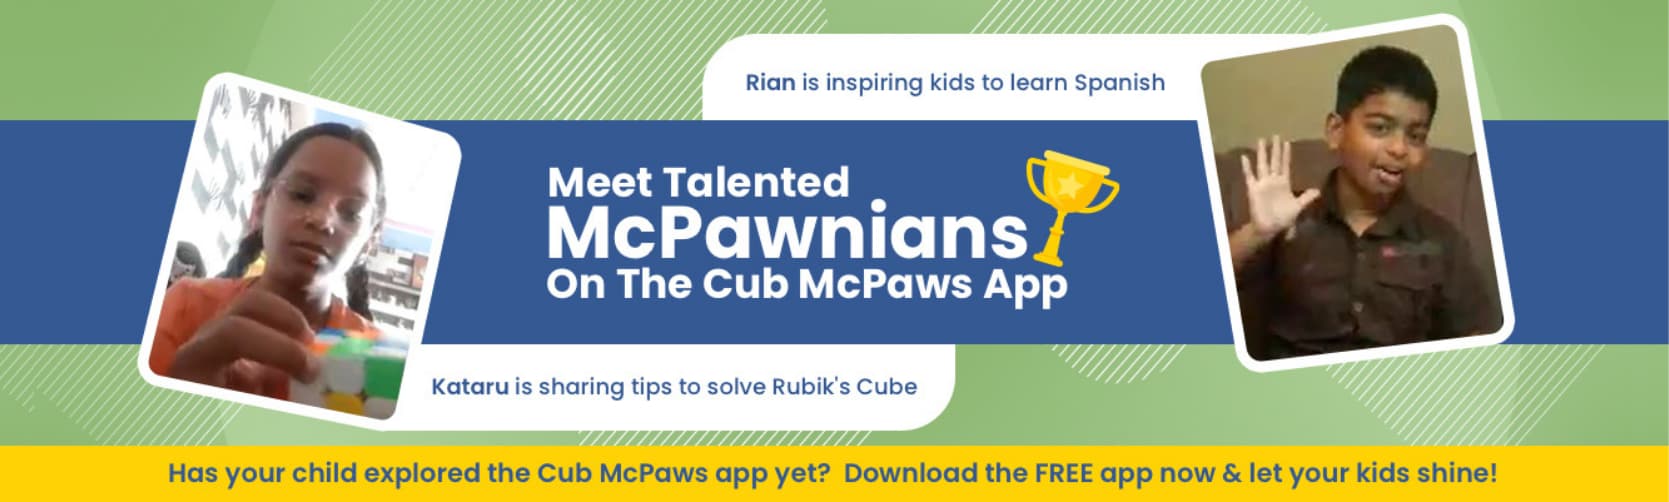 Kids can win scholarships worth Rs. 6,50,000 by participating in various contests like singing, musical instruments, handwriting & online quiz competition to name a few. There are other exciting prizes too. Download Cub McPaws kids app now!